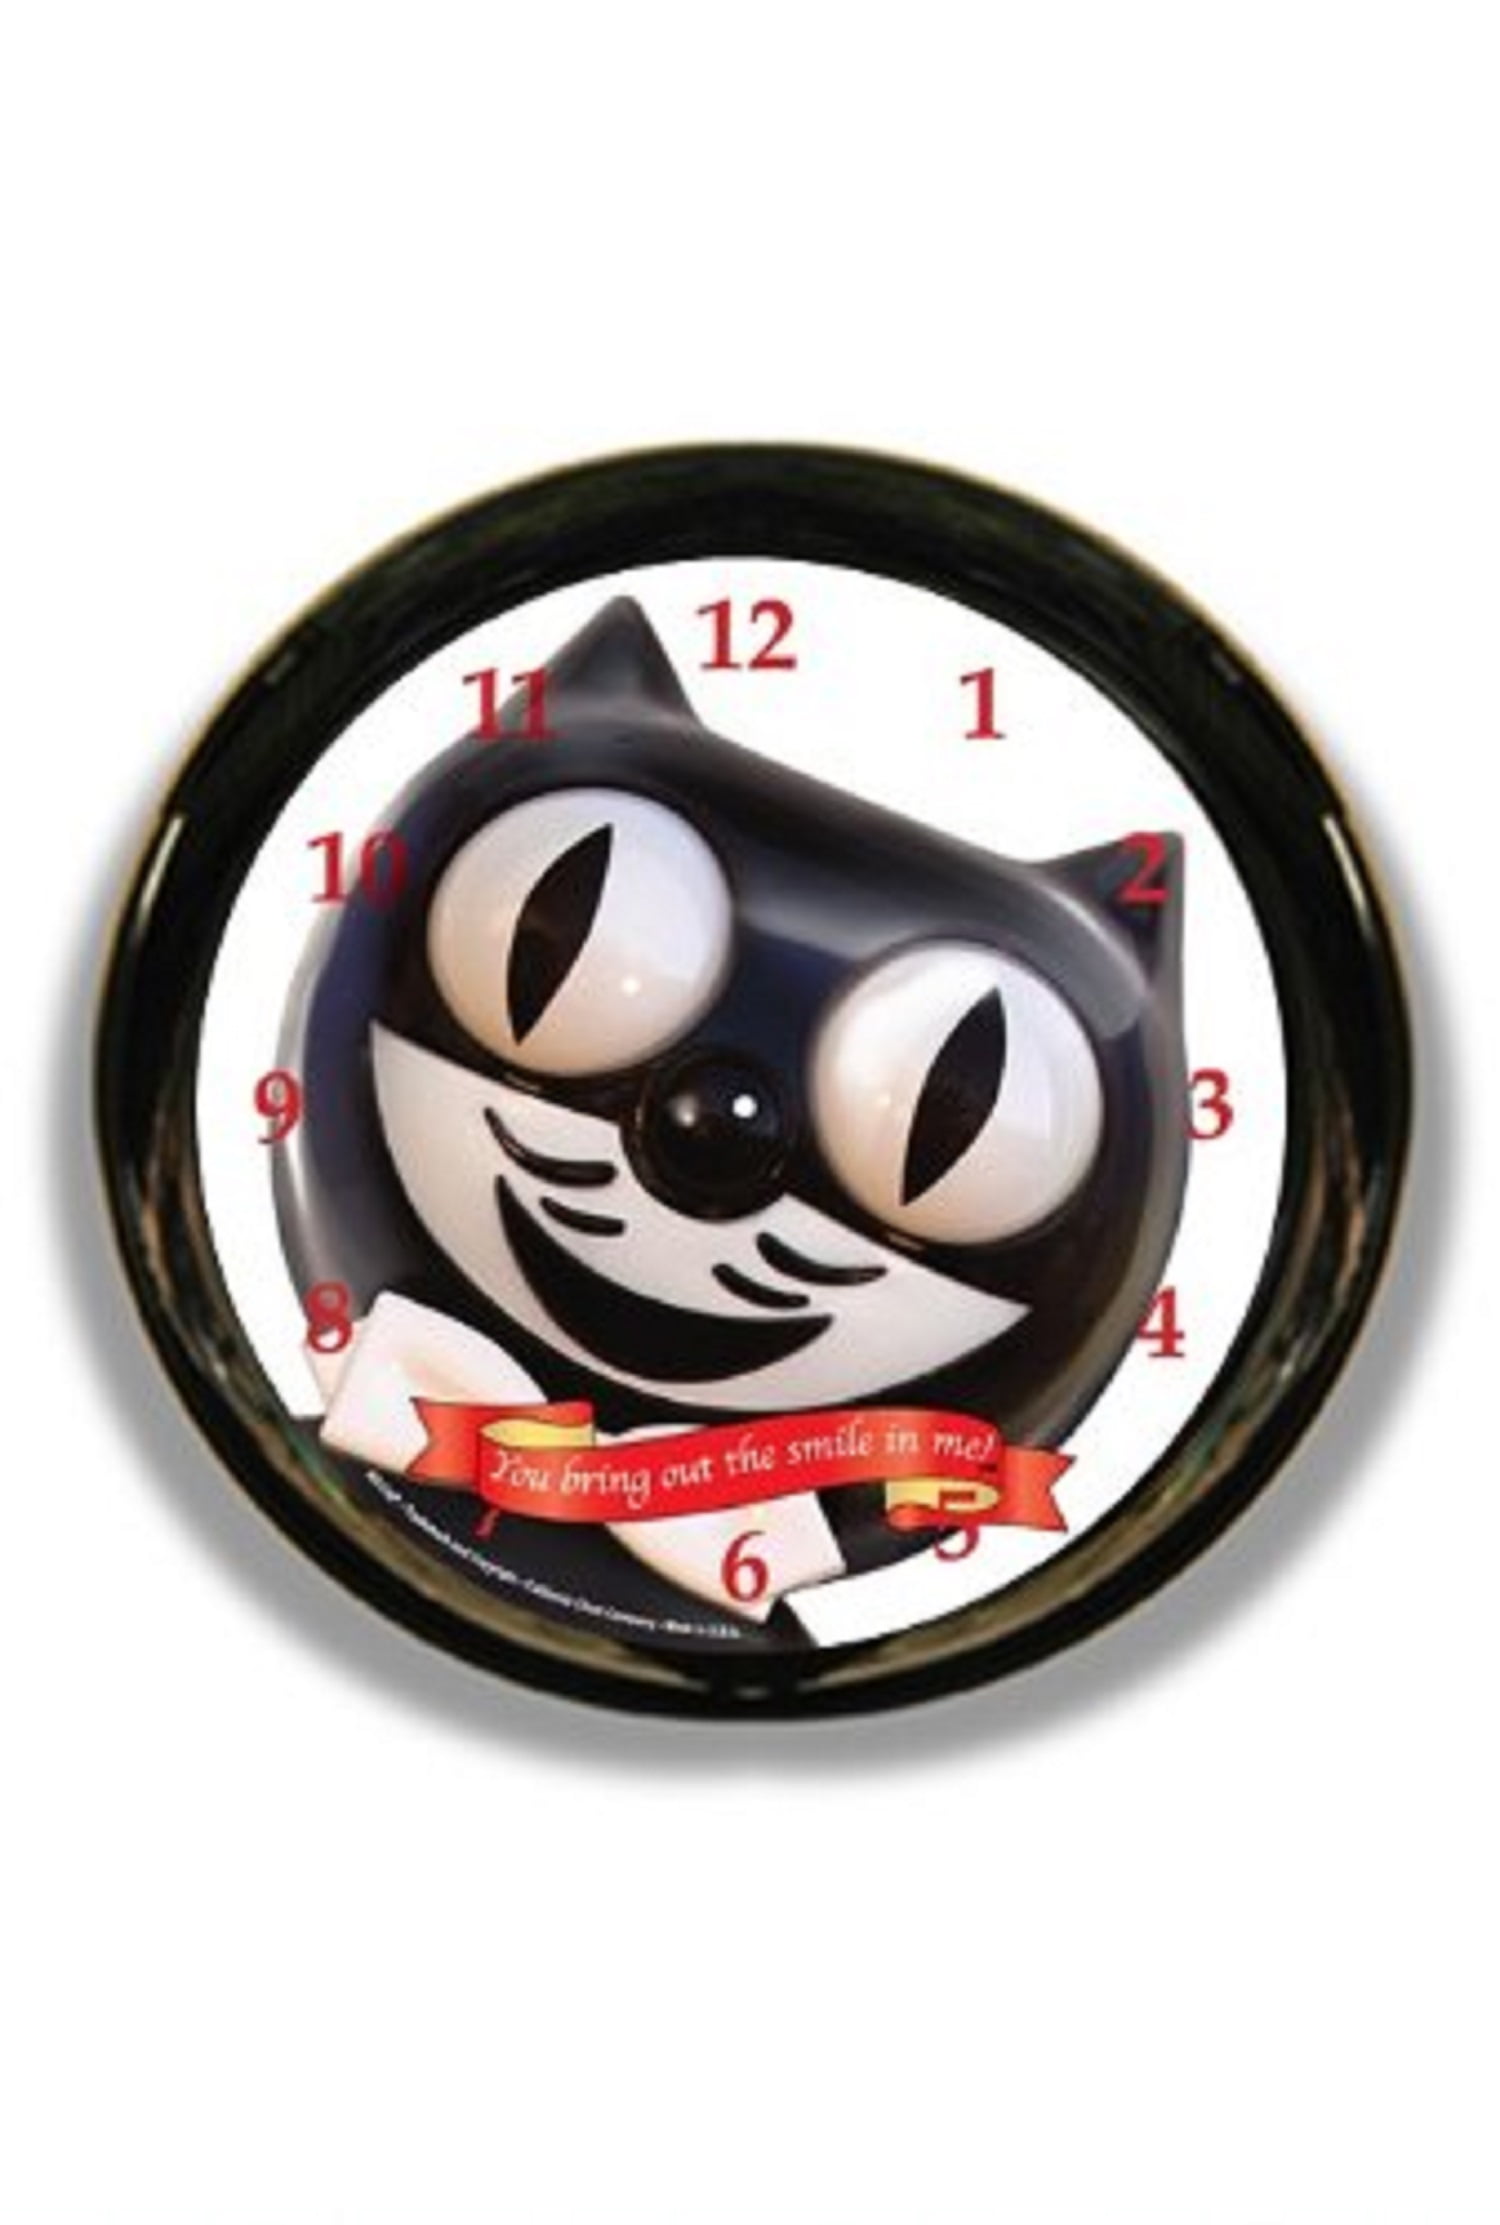 NEW AUTHENTIC FULL SIZE Kit Cat Clock SCARLET RED Made In USA Ships in 48 Hrs. 